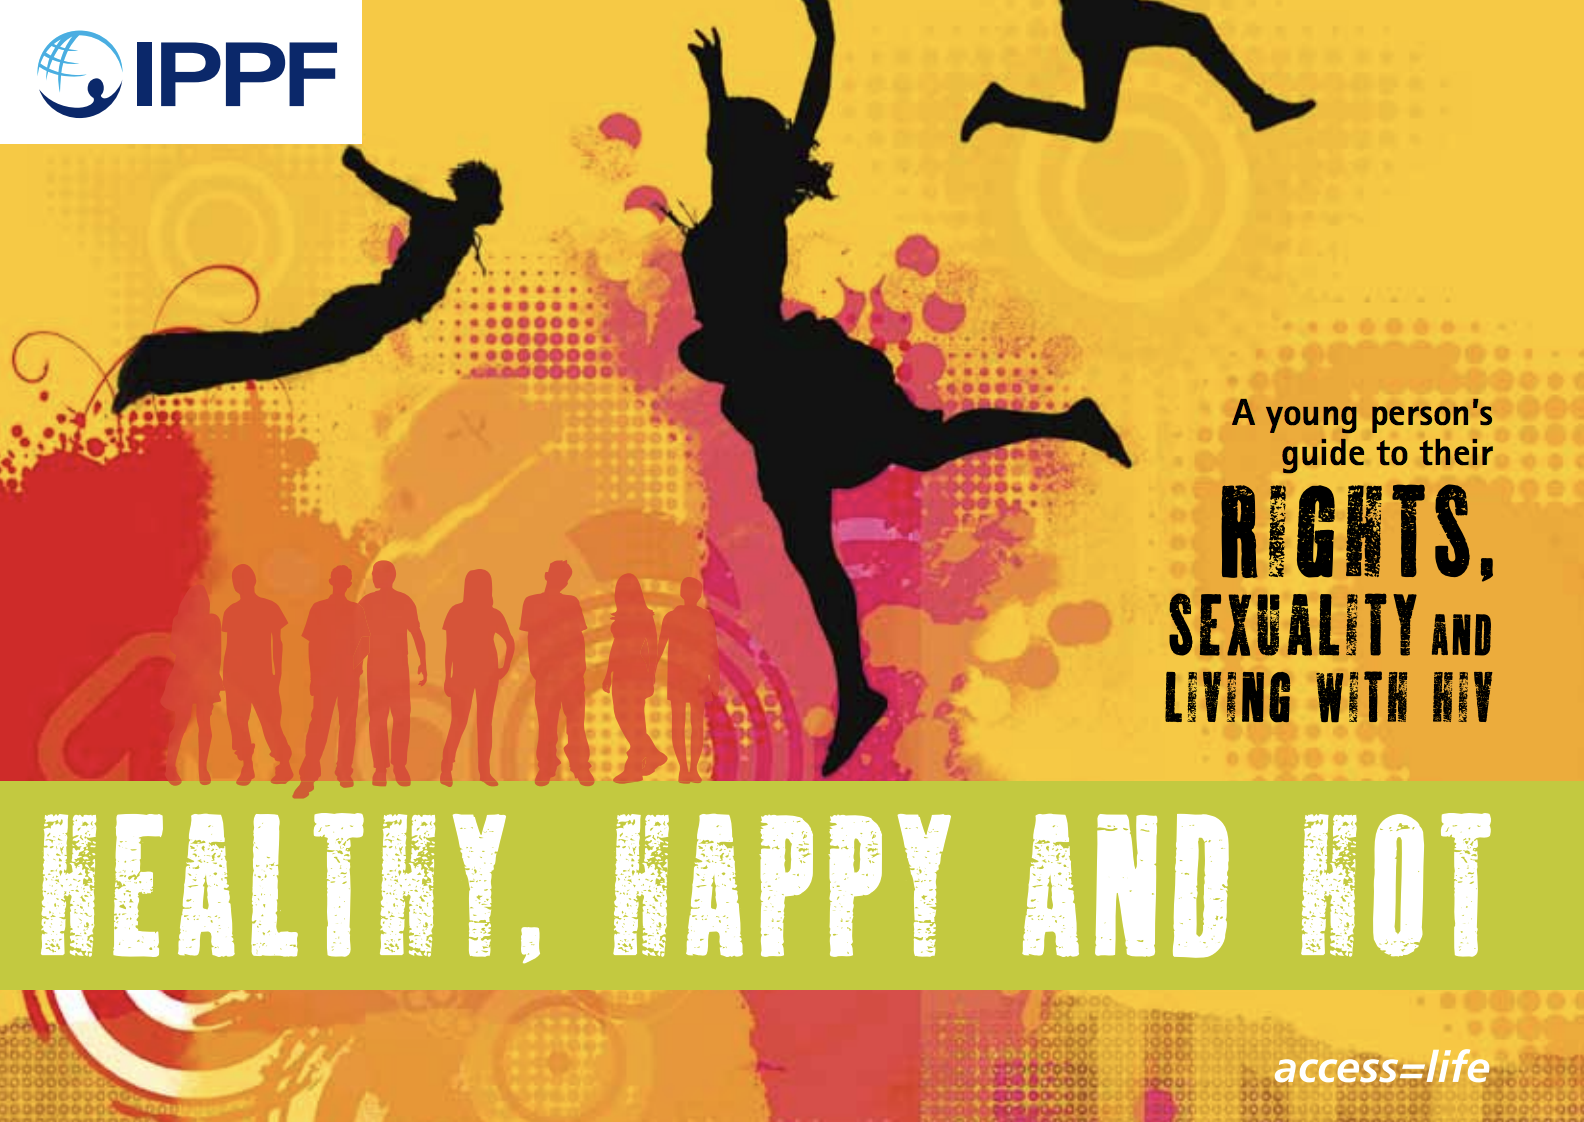 Healthy, Happy and Hot: A Young Person’s Guide to their Rights, Sexuality and Living with HIV